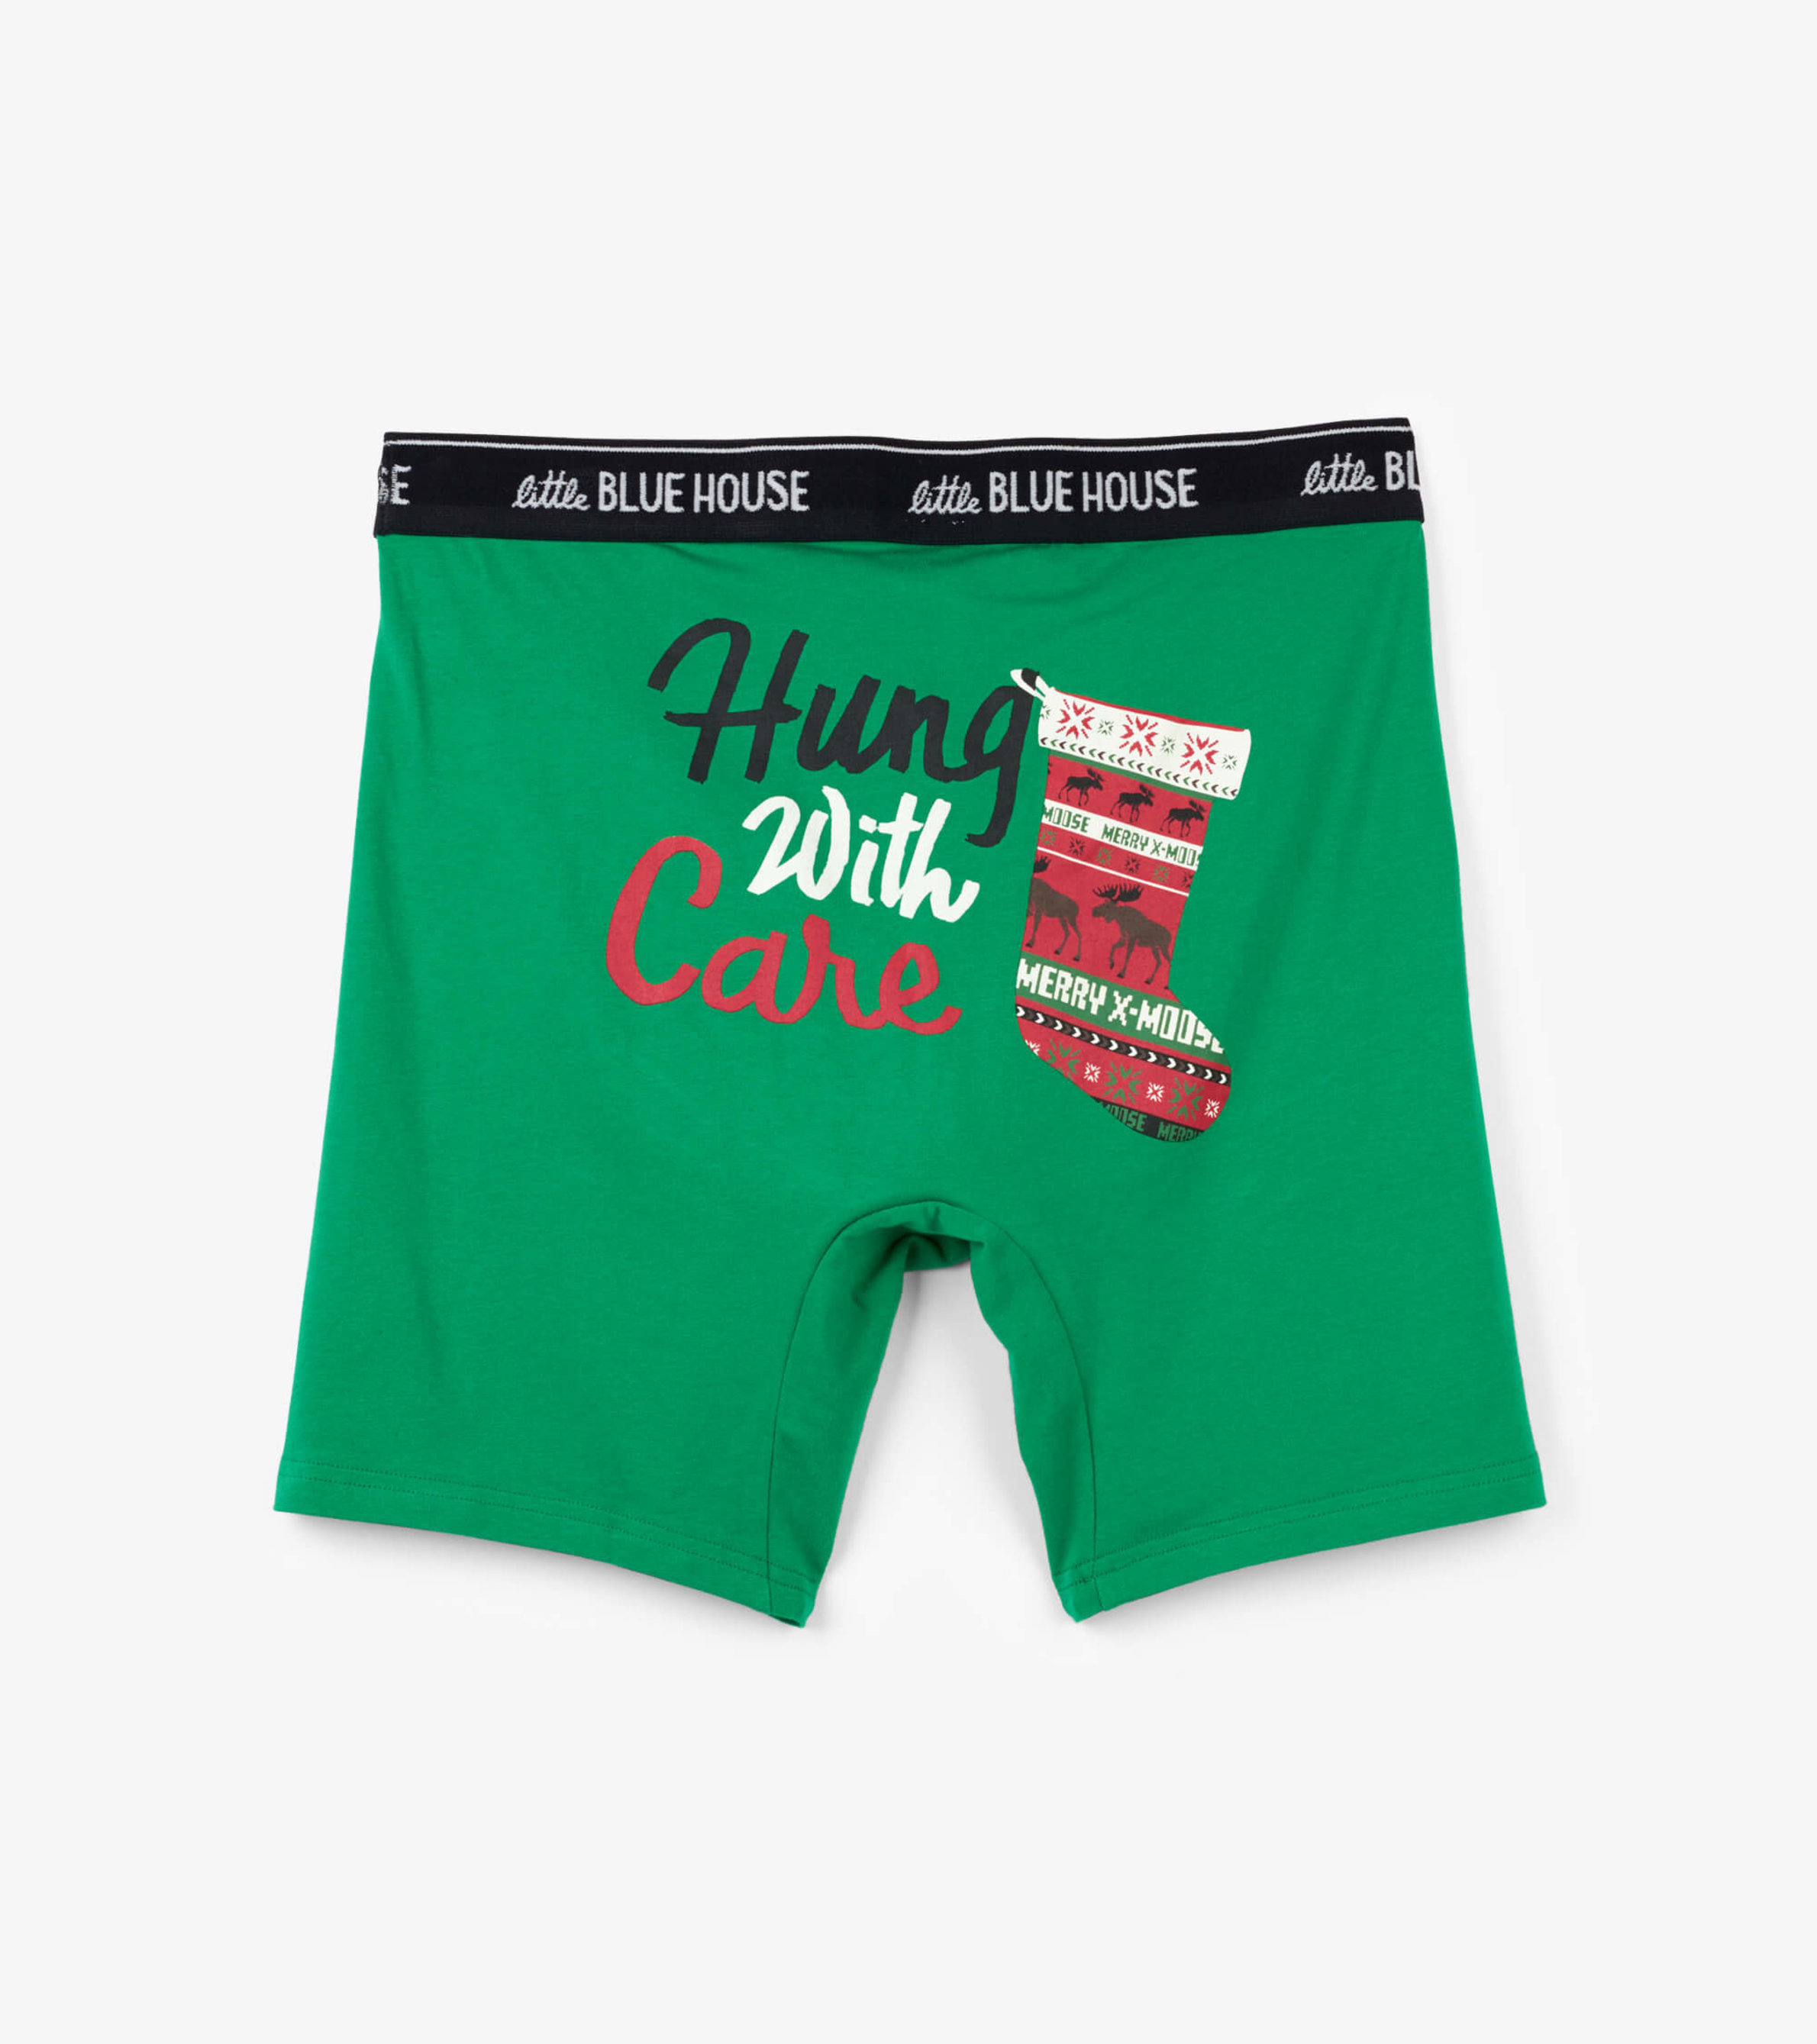 https://cdn.littlebluehouse.com/product_images/hung-with-care-mens-boxer-briefs/BXCHUNG001_B_jpg/pdp_zoom.jpg?c=1600447652&locale=en